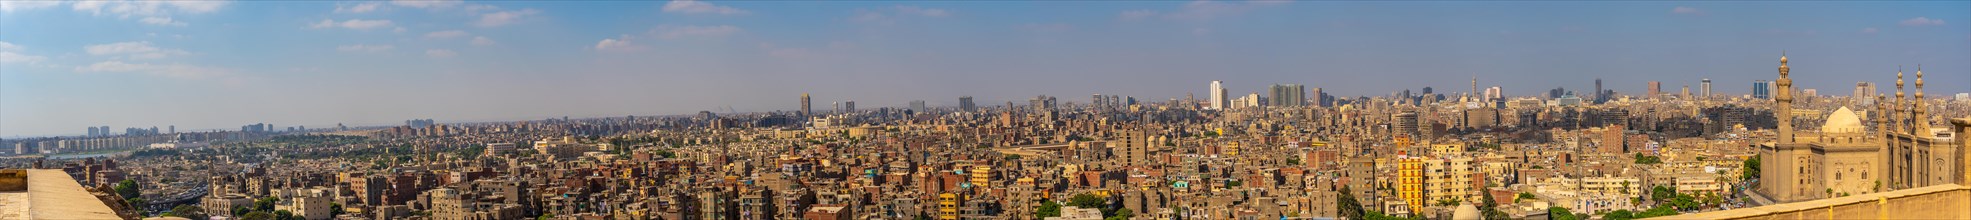 Panoramic of the skyline of the city of Cairo from the Alabaster Mosque